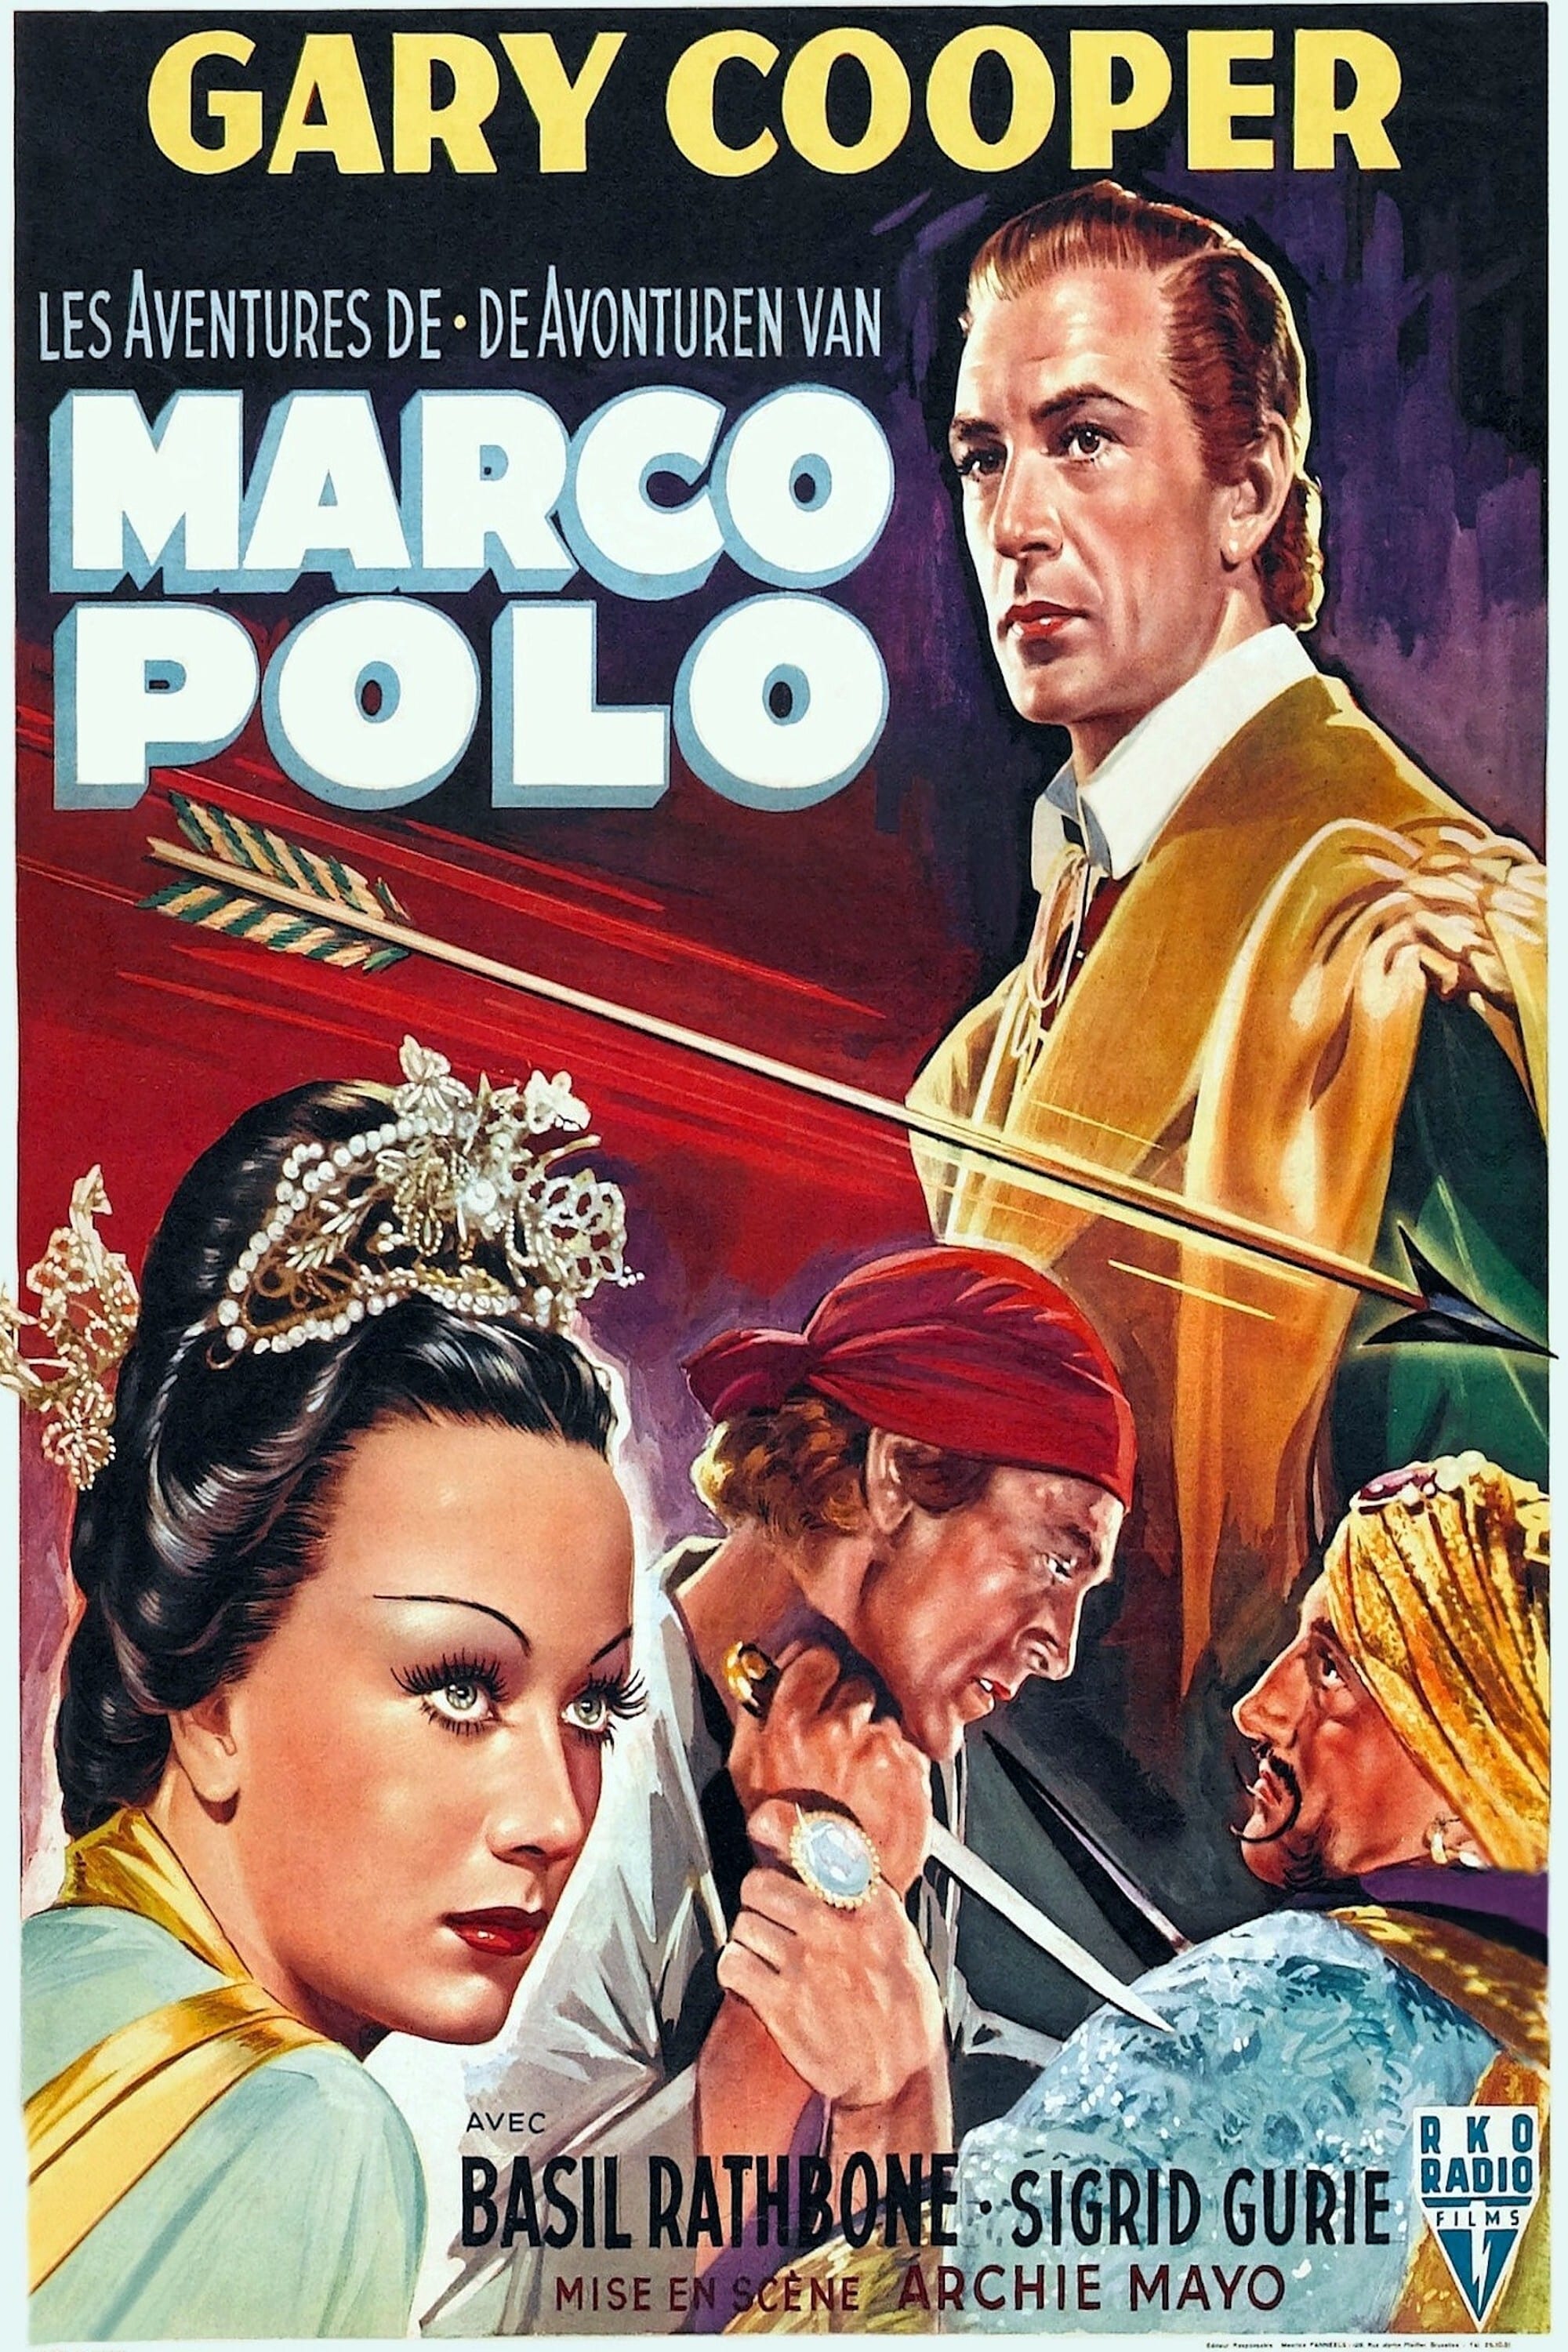 The Adventures of Marco Polo